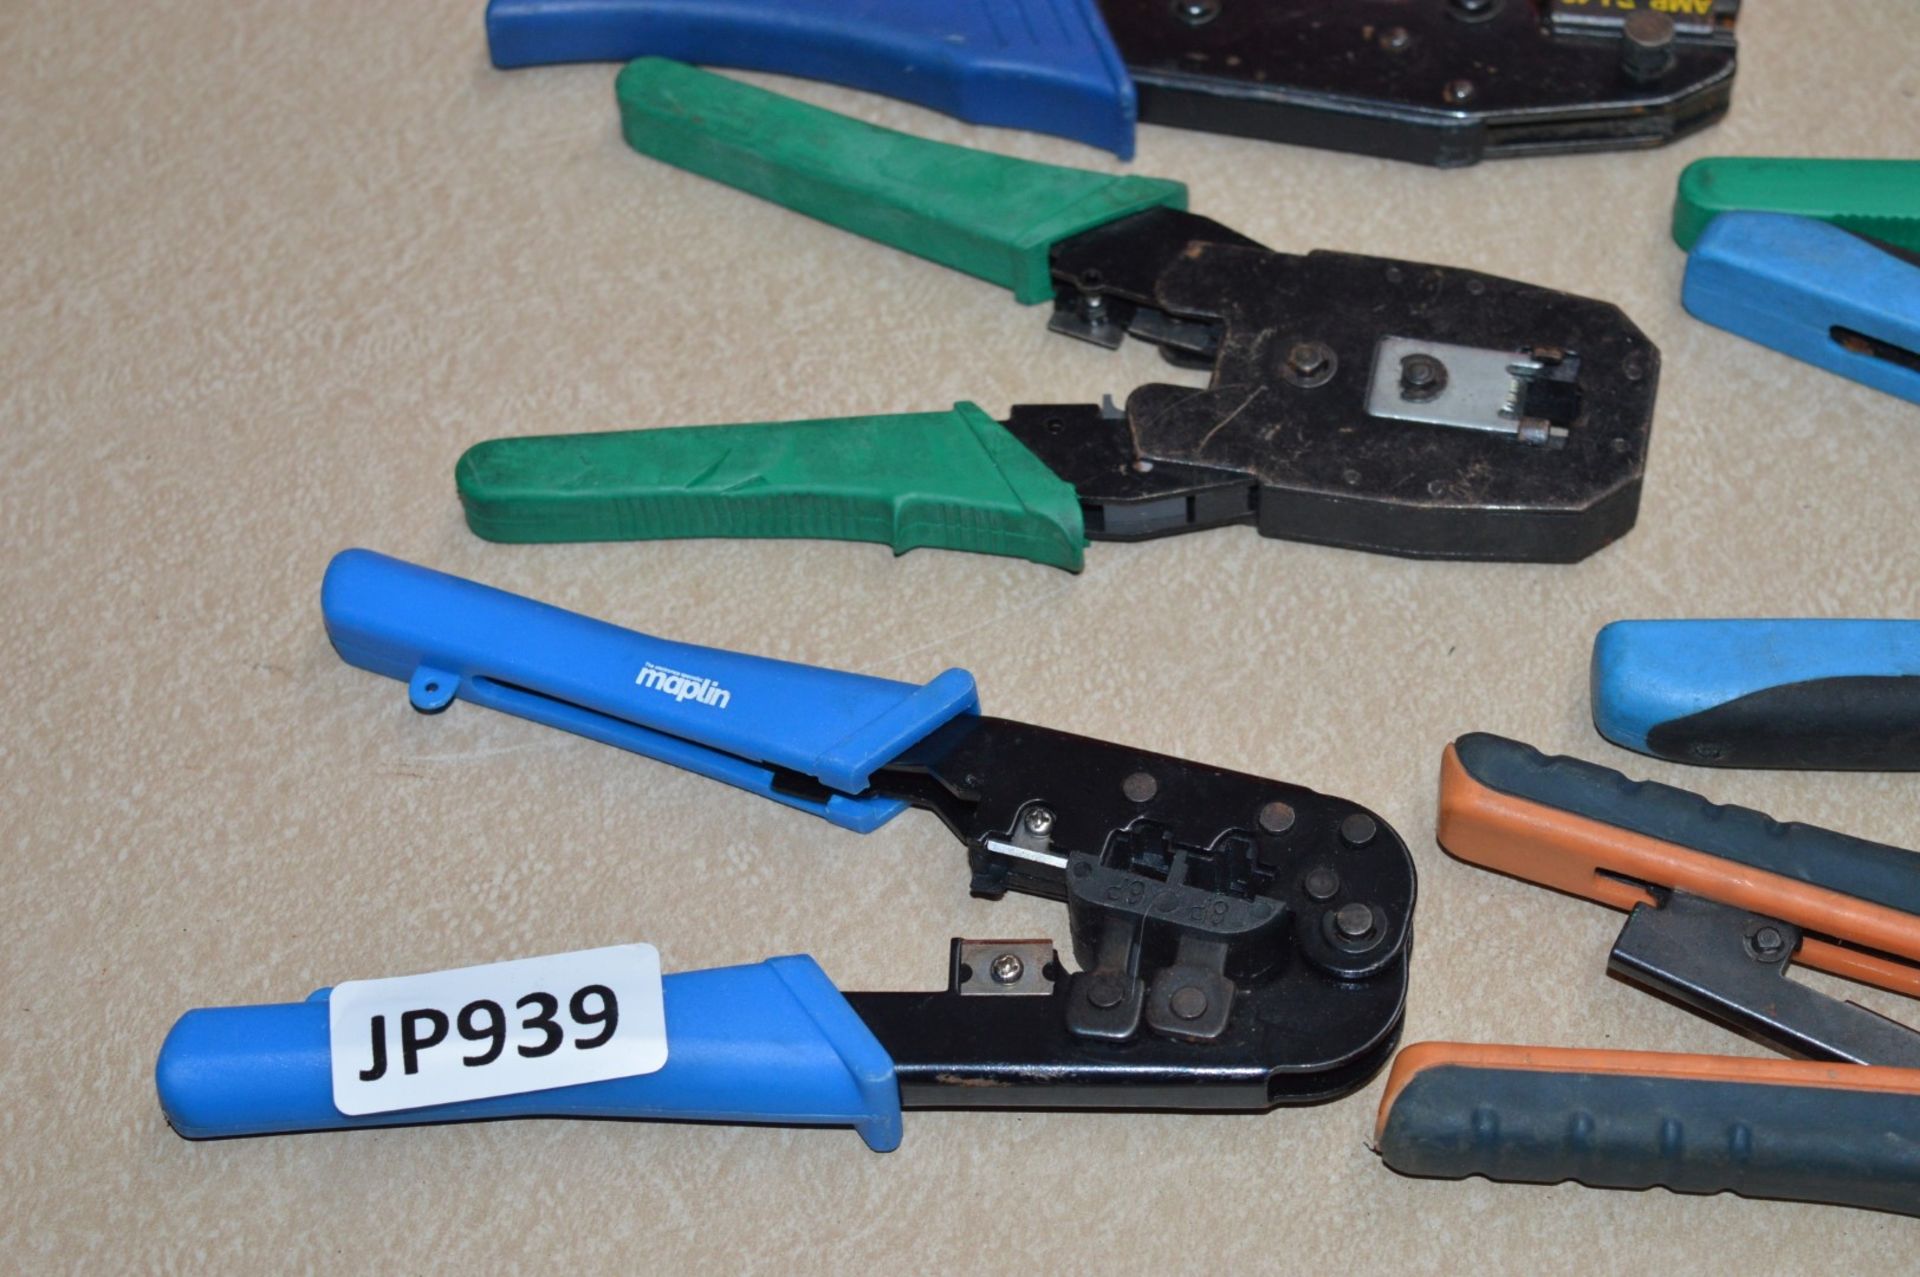 6 x Various Crimping Tools For Telecoms and Network Applications - CL011 - Ref JP939 - Location: - Image 4 of 5